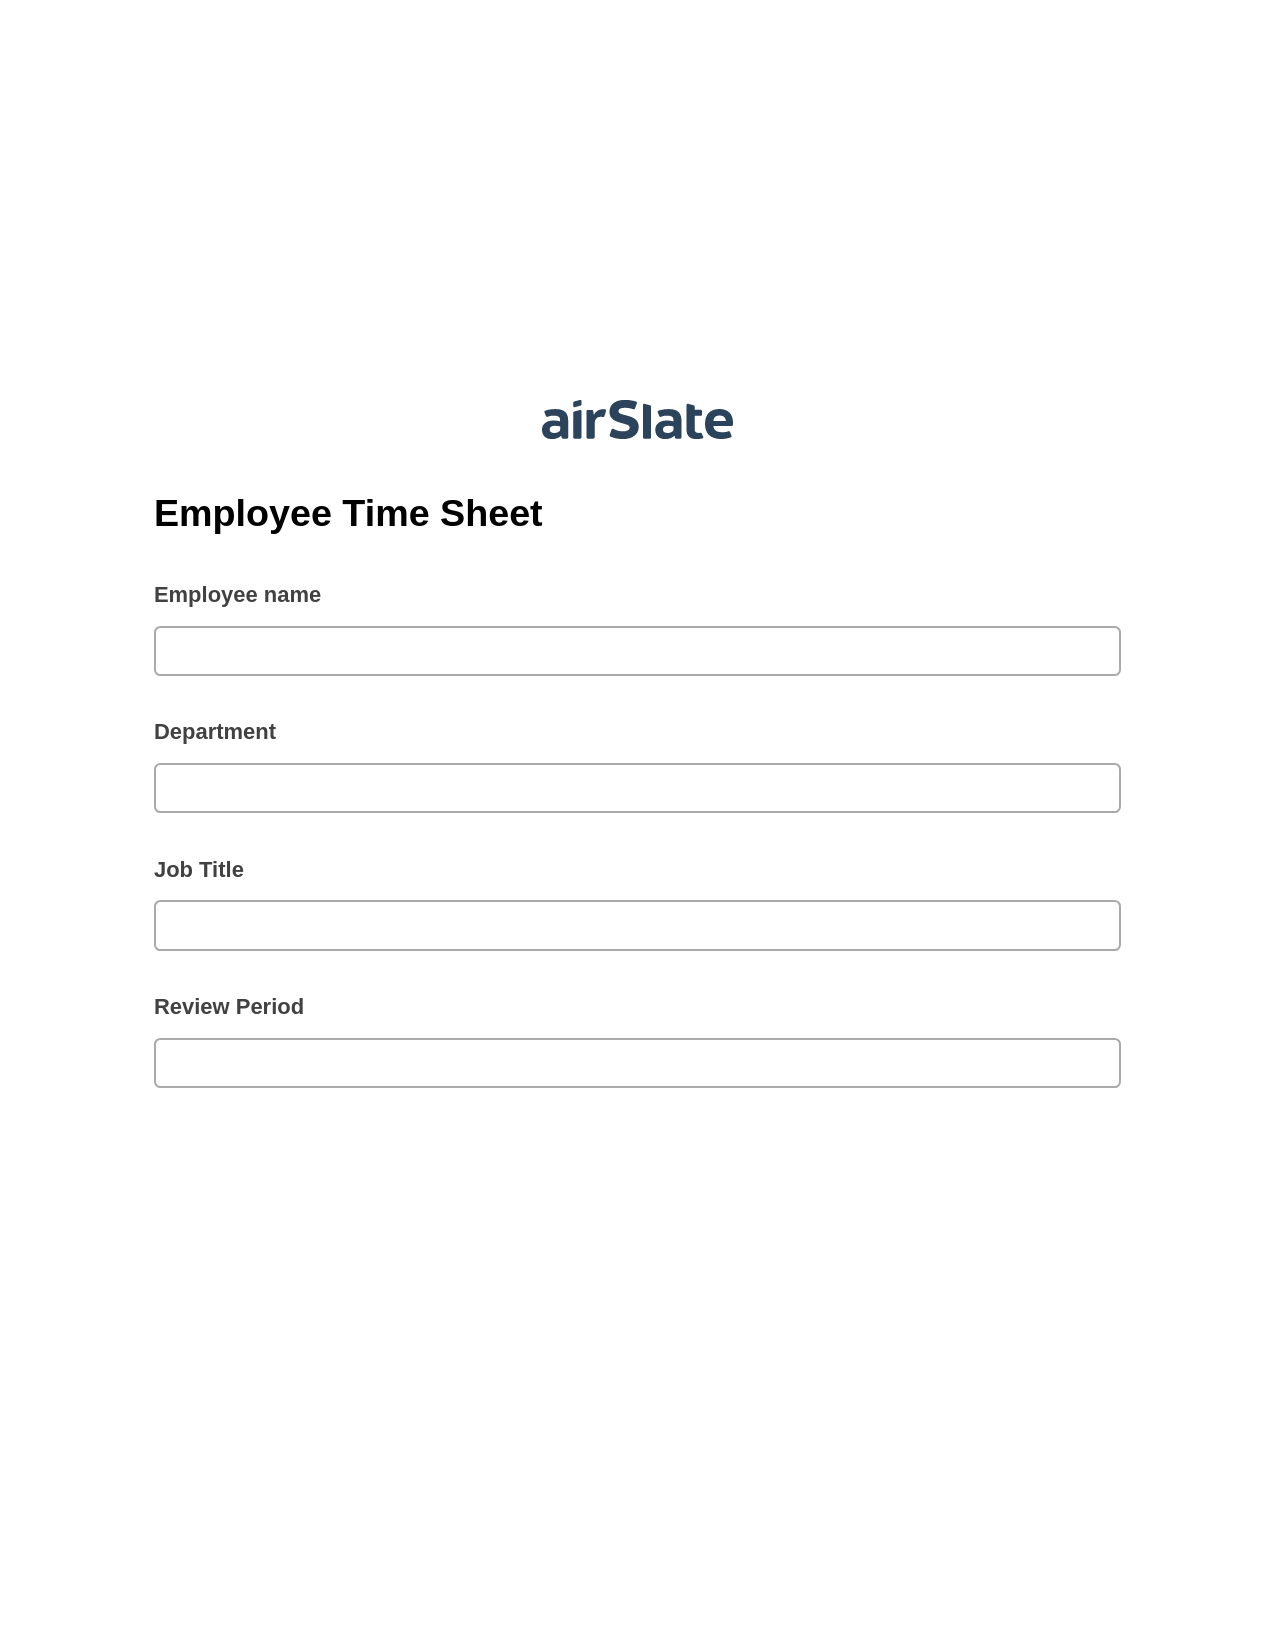 Employee Time Sheet Pre-fill from CSV File Bot, Create slate addon, Archive to OneDrive Bot